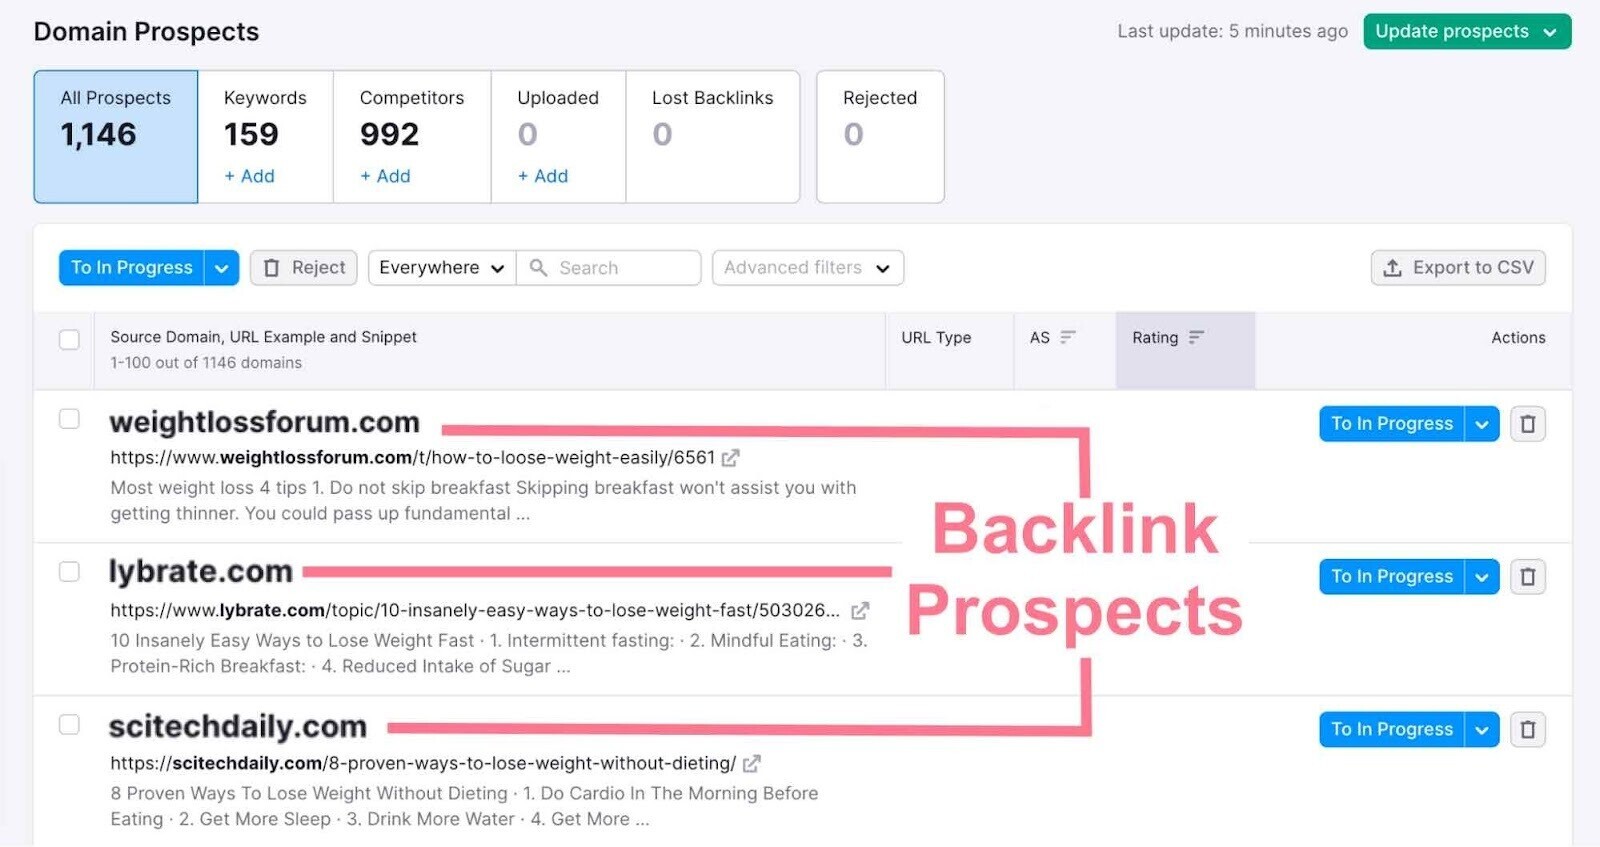 see backlink prospects